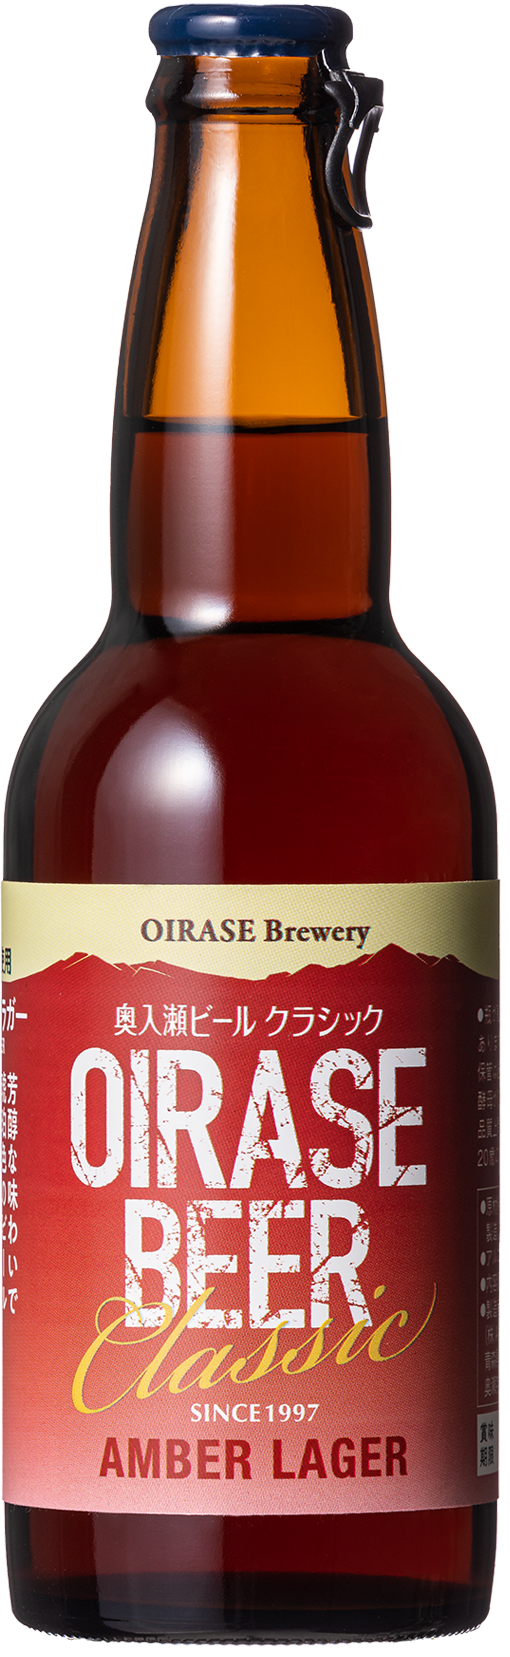 OIRASE BEER image3